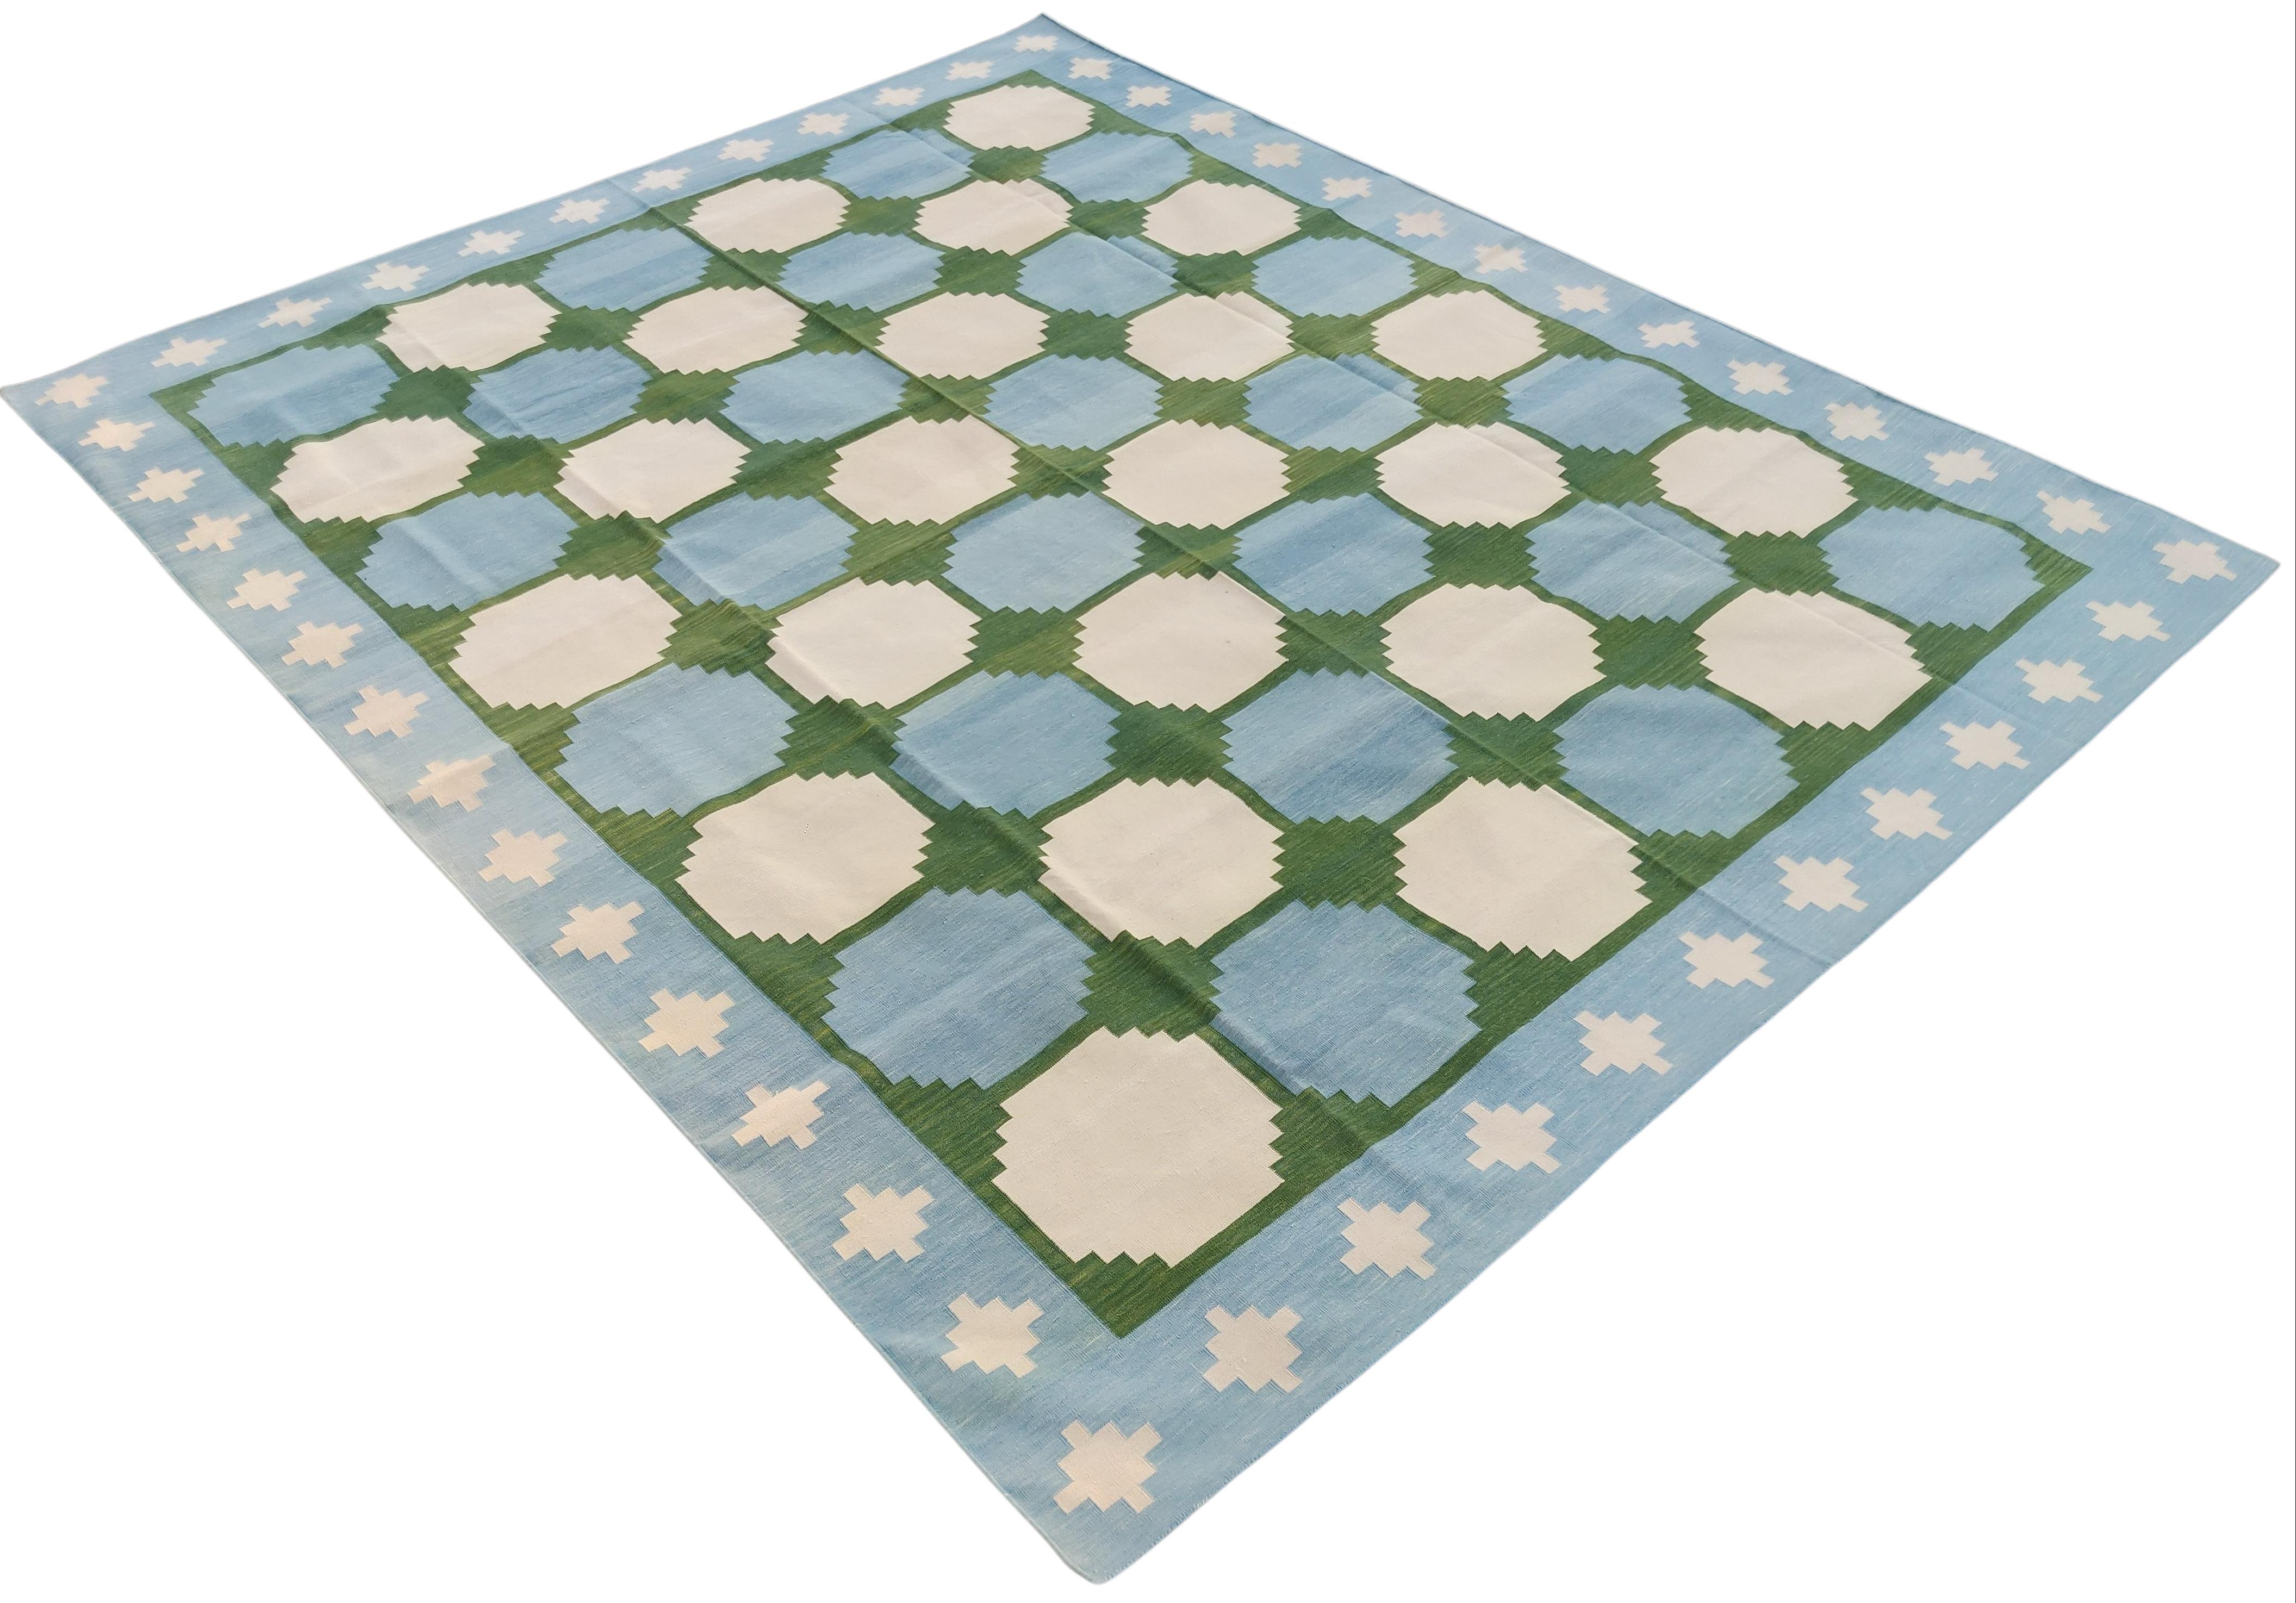 Cotton Natural Vegetable Dyed Forest Green , Sky Blue And Cream Tile Patterned Swedish Rug-10'x14'
These special flat-weave dhurries are hand-woven with 15 ply 100% cotton yarn. Due to the special manufacturing techniques used to create our rugs,